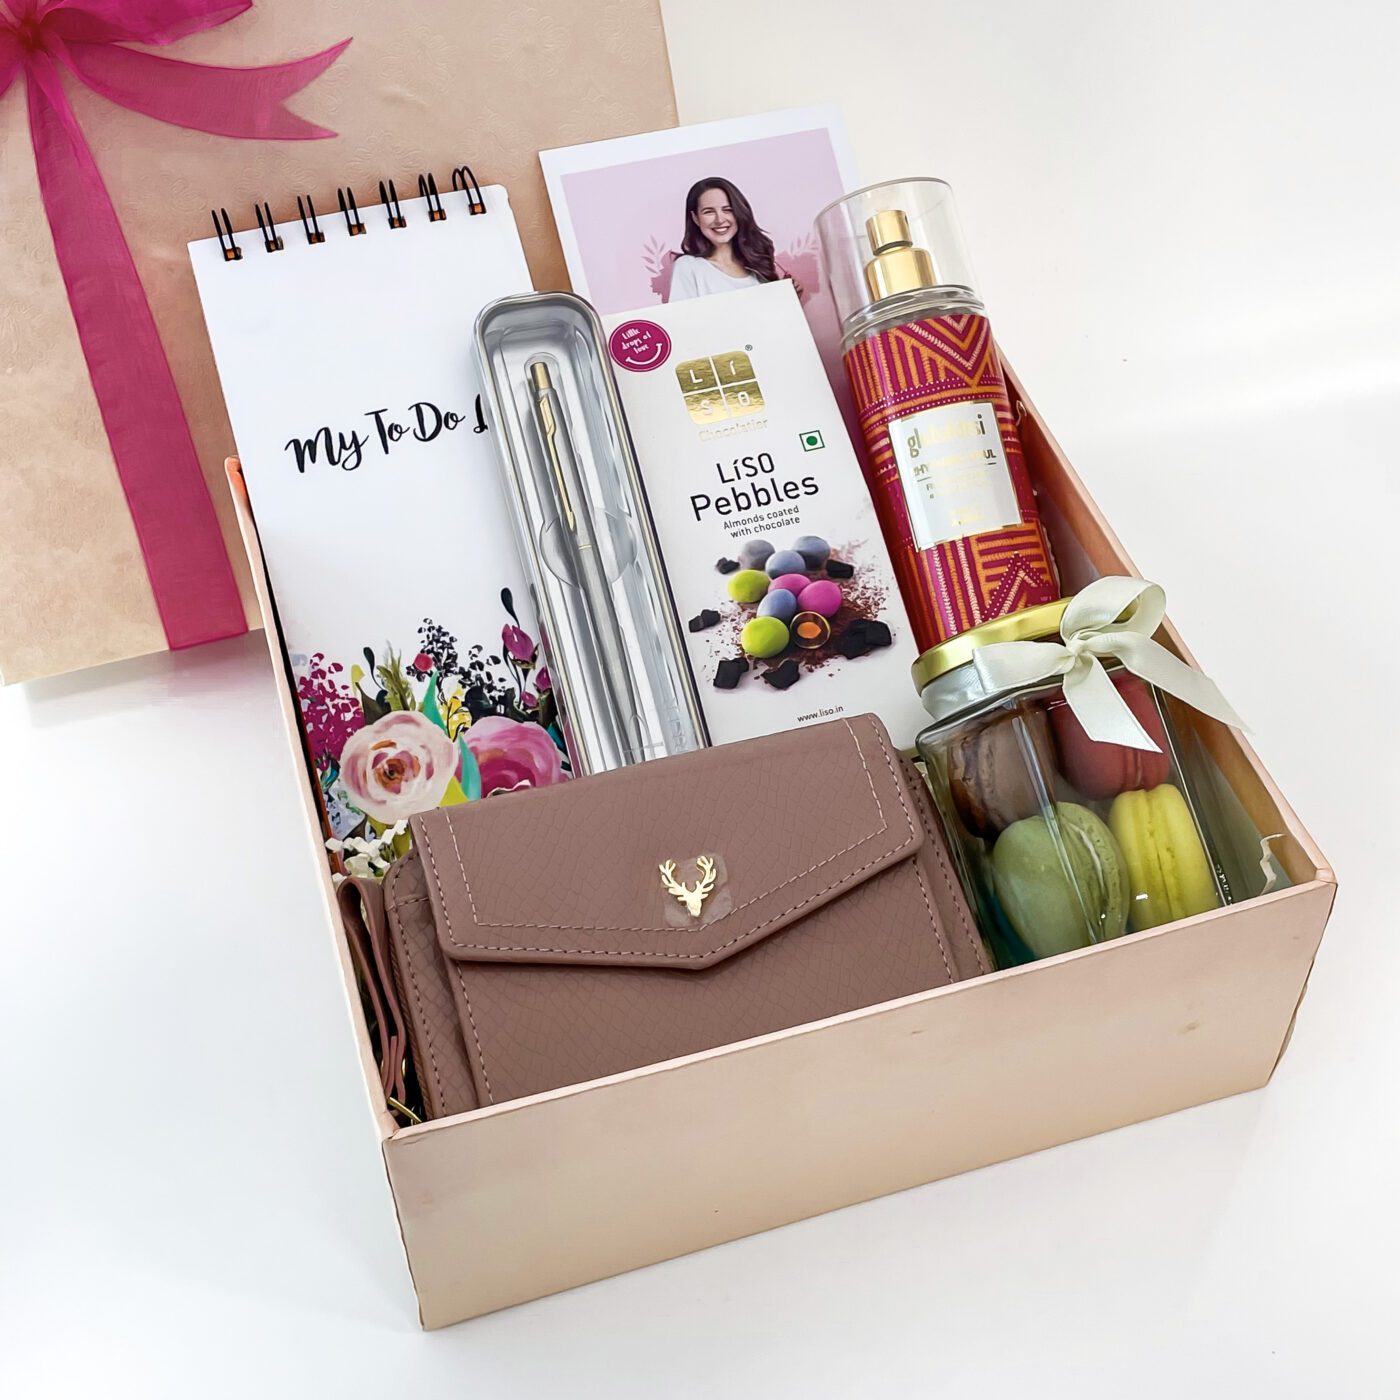 Gifts For Parents India | Send Gifts for Mom and Dad - OyeGifts